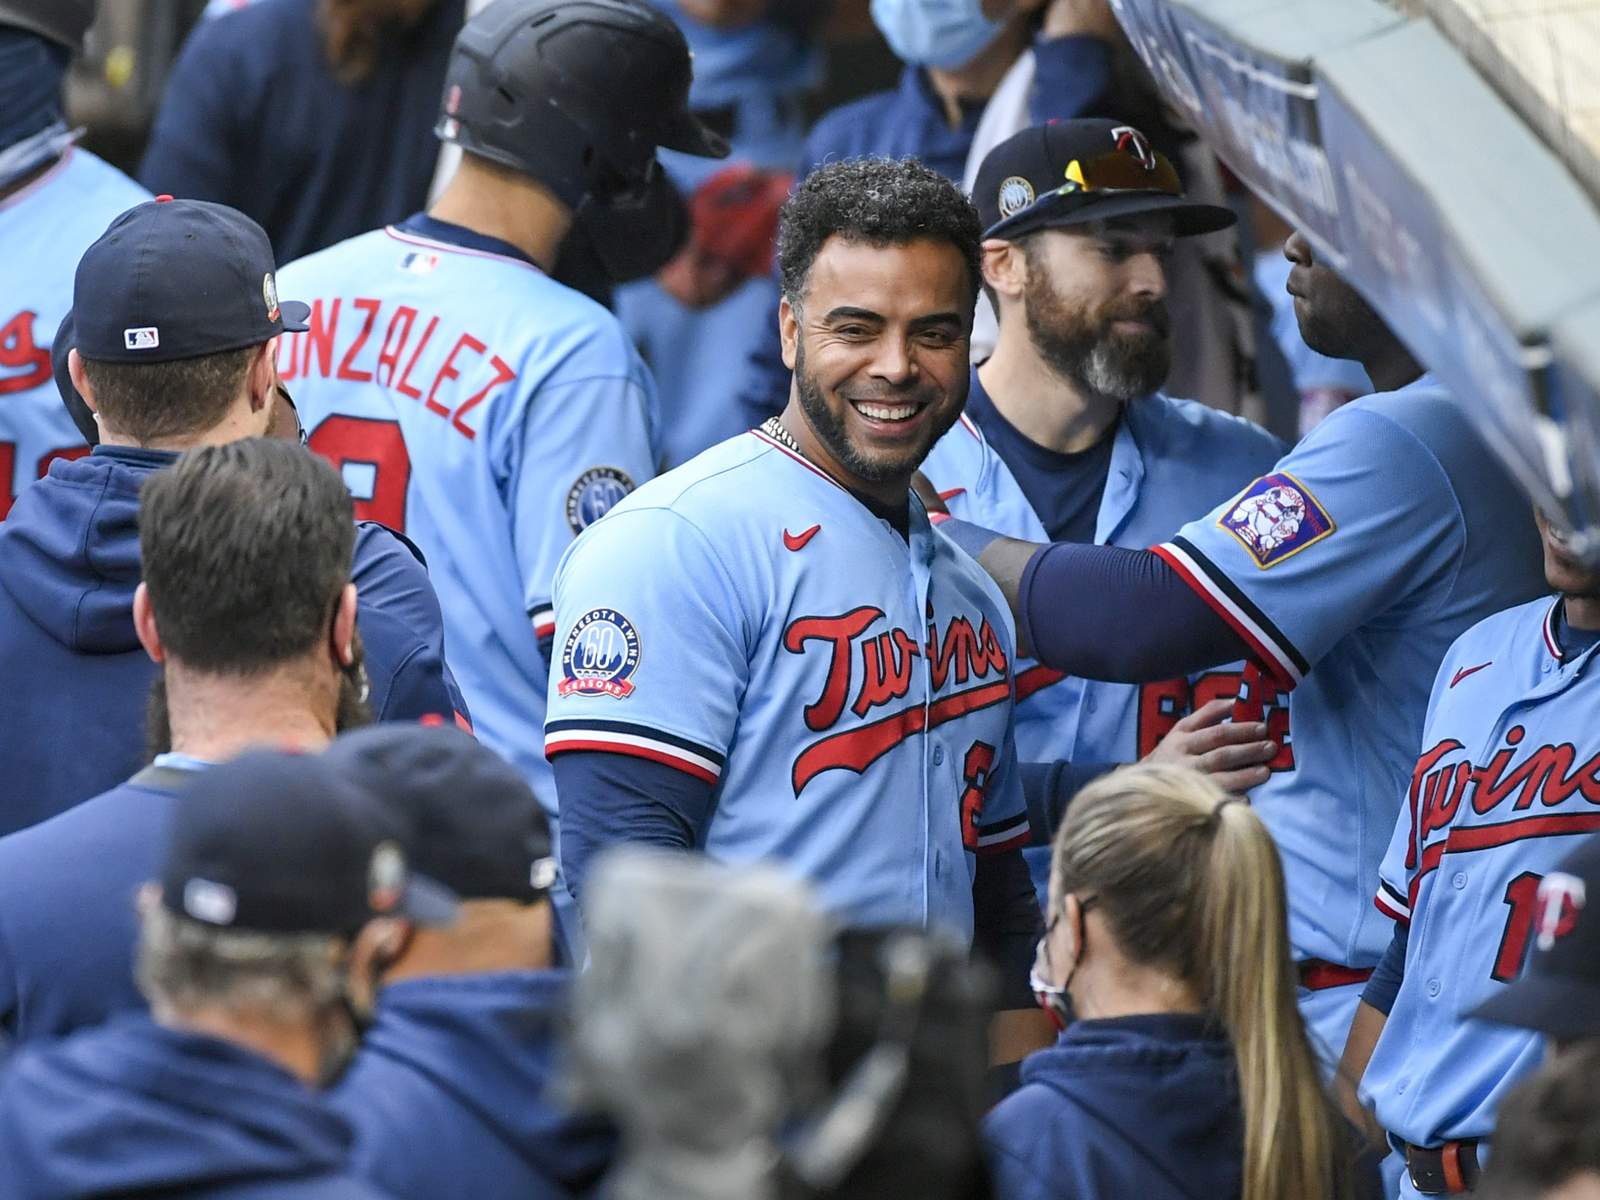 Cruz, returning to Twins: 'Retirement is not on my mind'